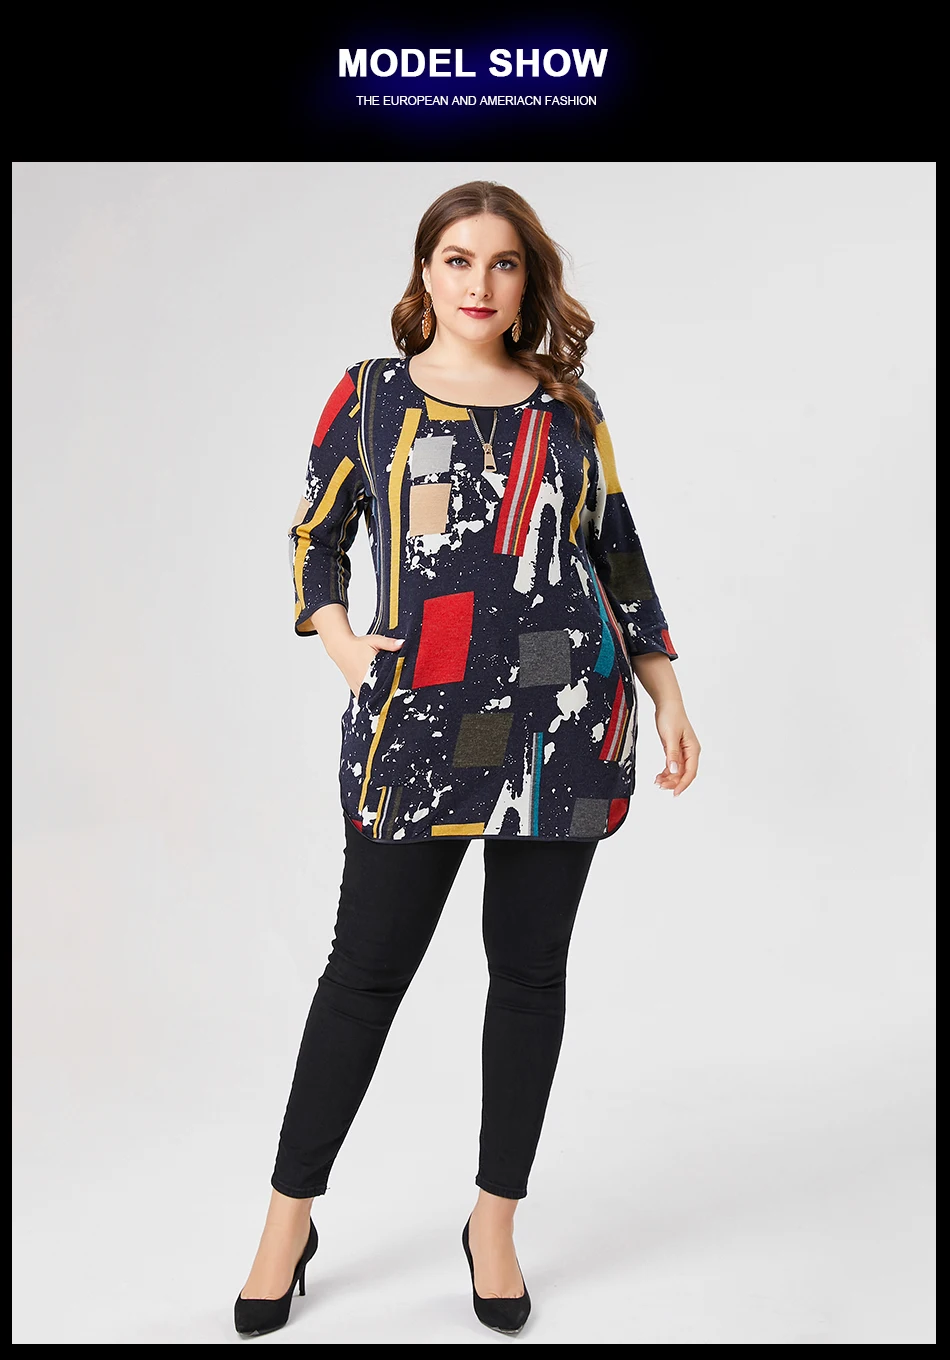 Tops For Fat Ladies - Casual Dress For Chubby Ladies - Cute Outfits For Chubby Ladies - Clothes For Short Fat Women - Dress For Fat Tummy - Dresses For Fat Women - Dress For Fat Girl To Look Slim - Fat Women Clothes